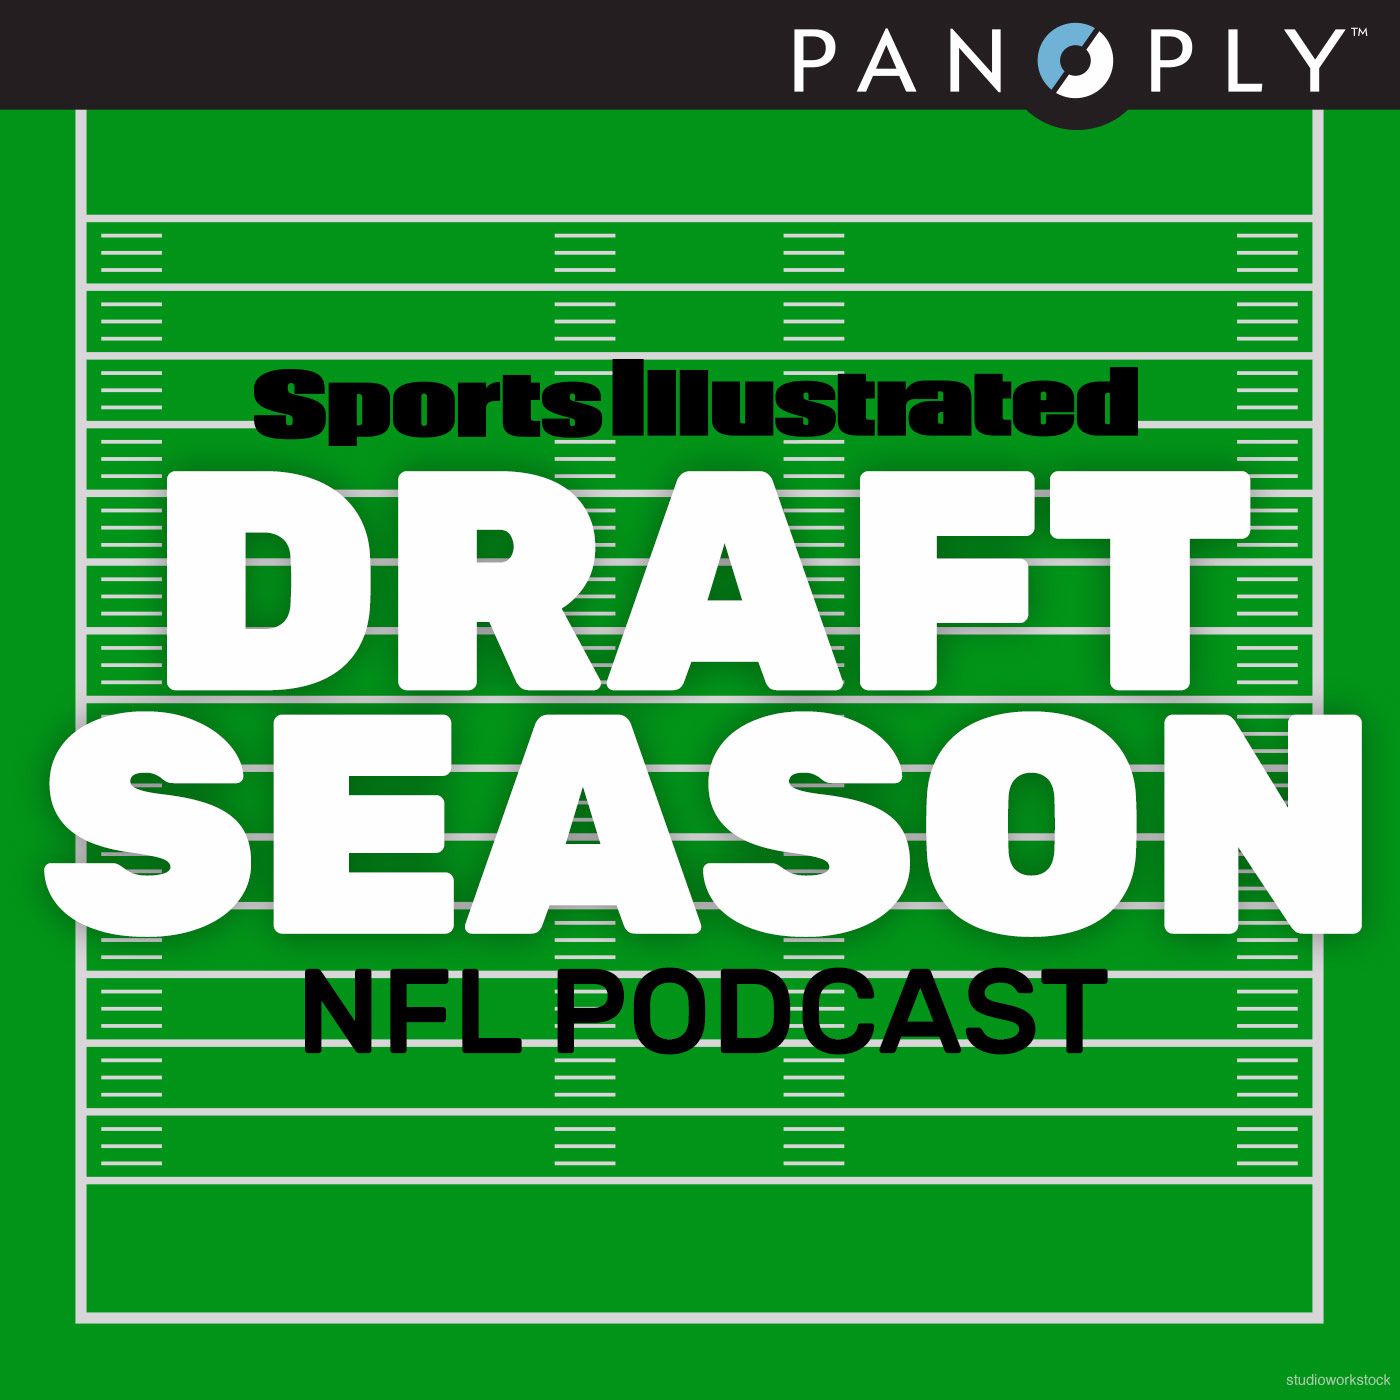 Trevone Boykin, the player asked to switch positions | S1, Episode 3